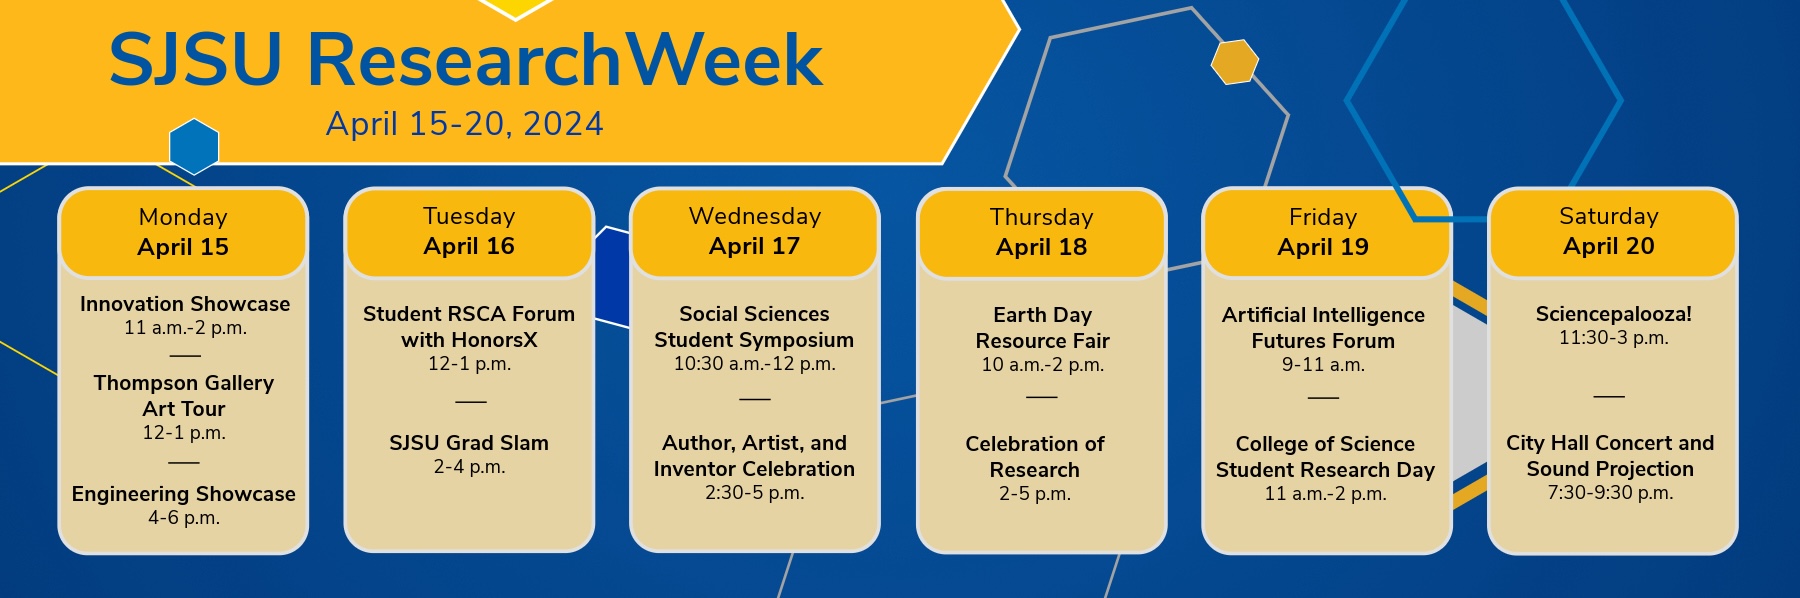 SJSU Research Week, April 15-20, in text with calendar items as seen in accessible cards below